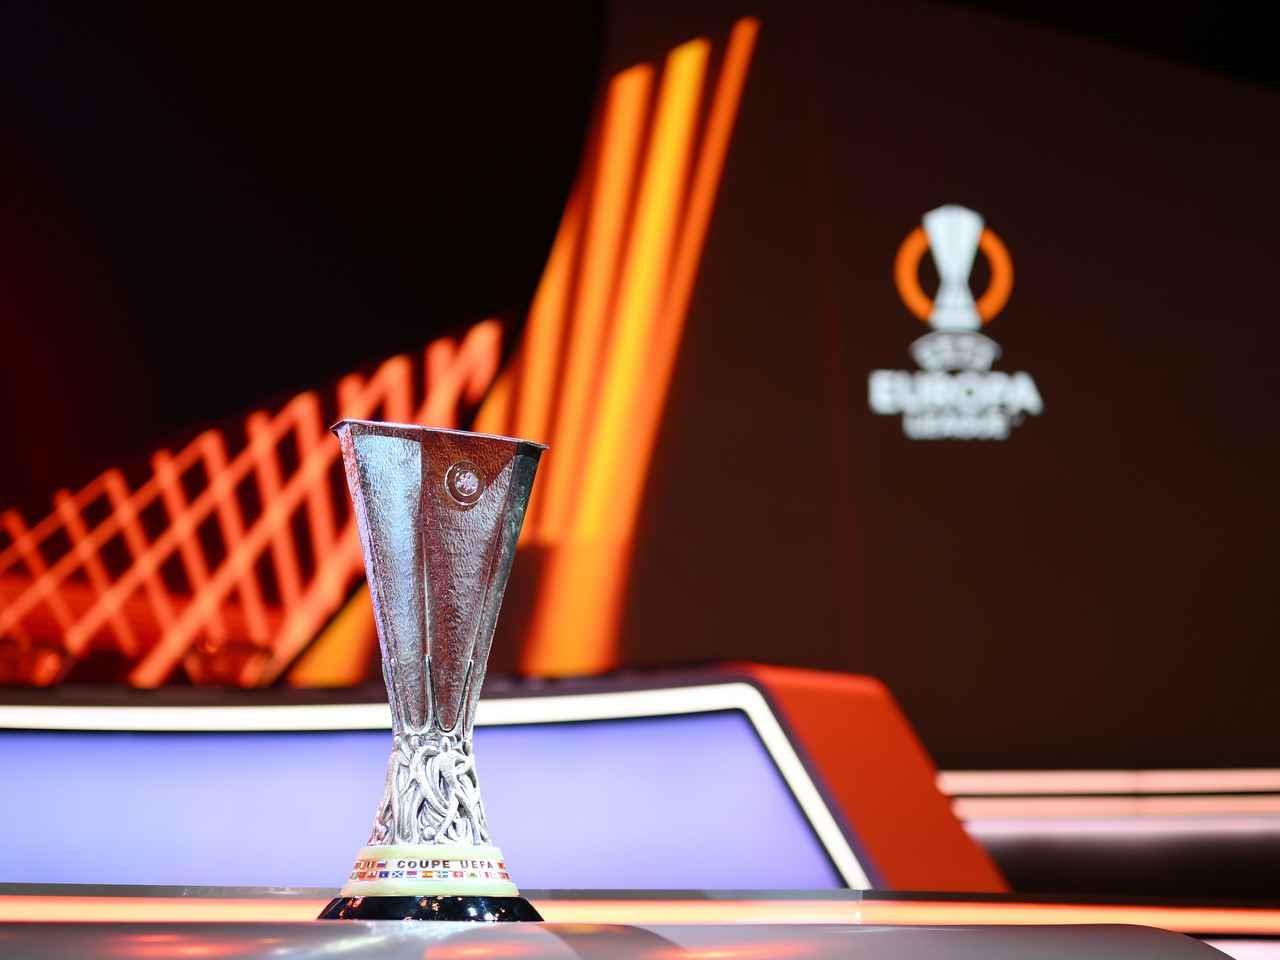 2022/23 UEFA Europa League Group Stage Draw – [Full List]